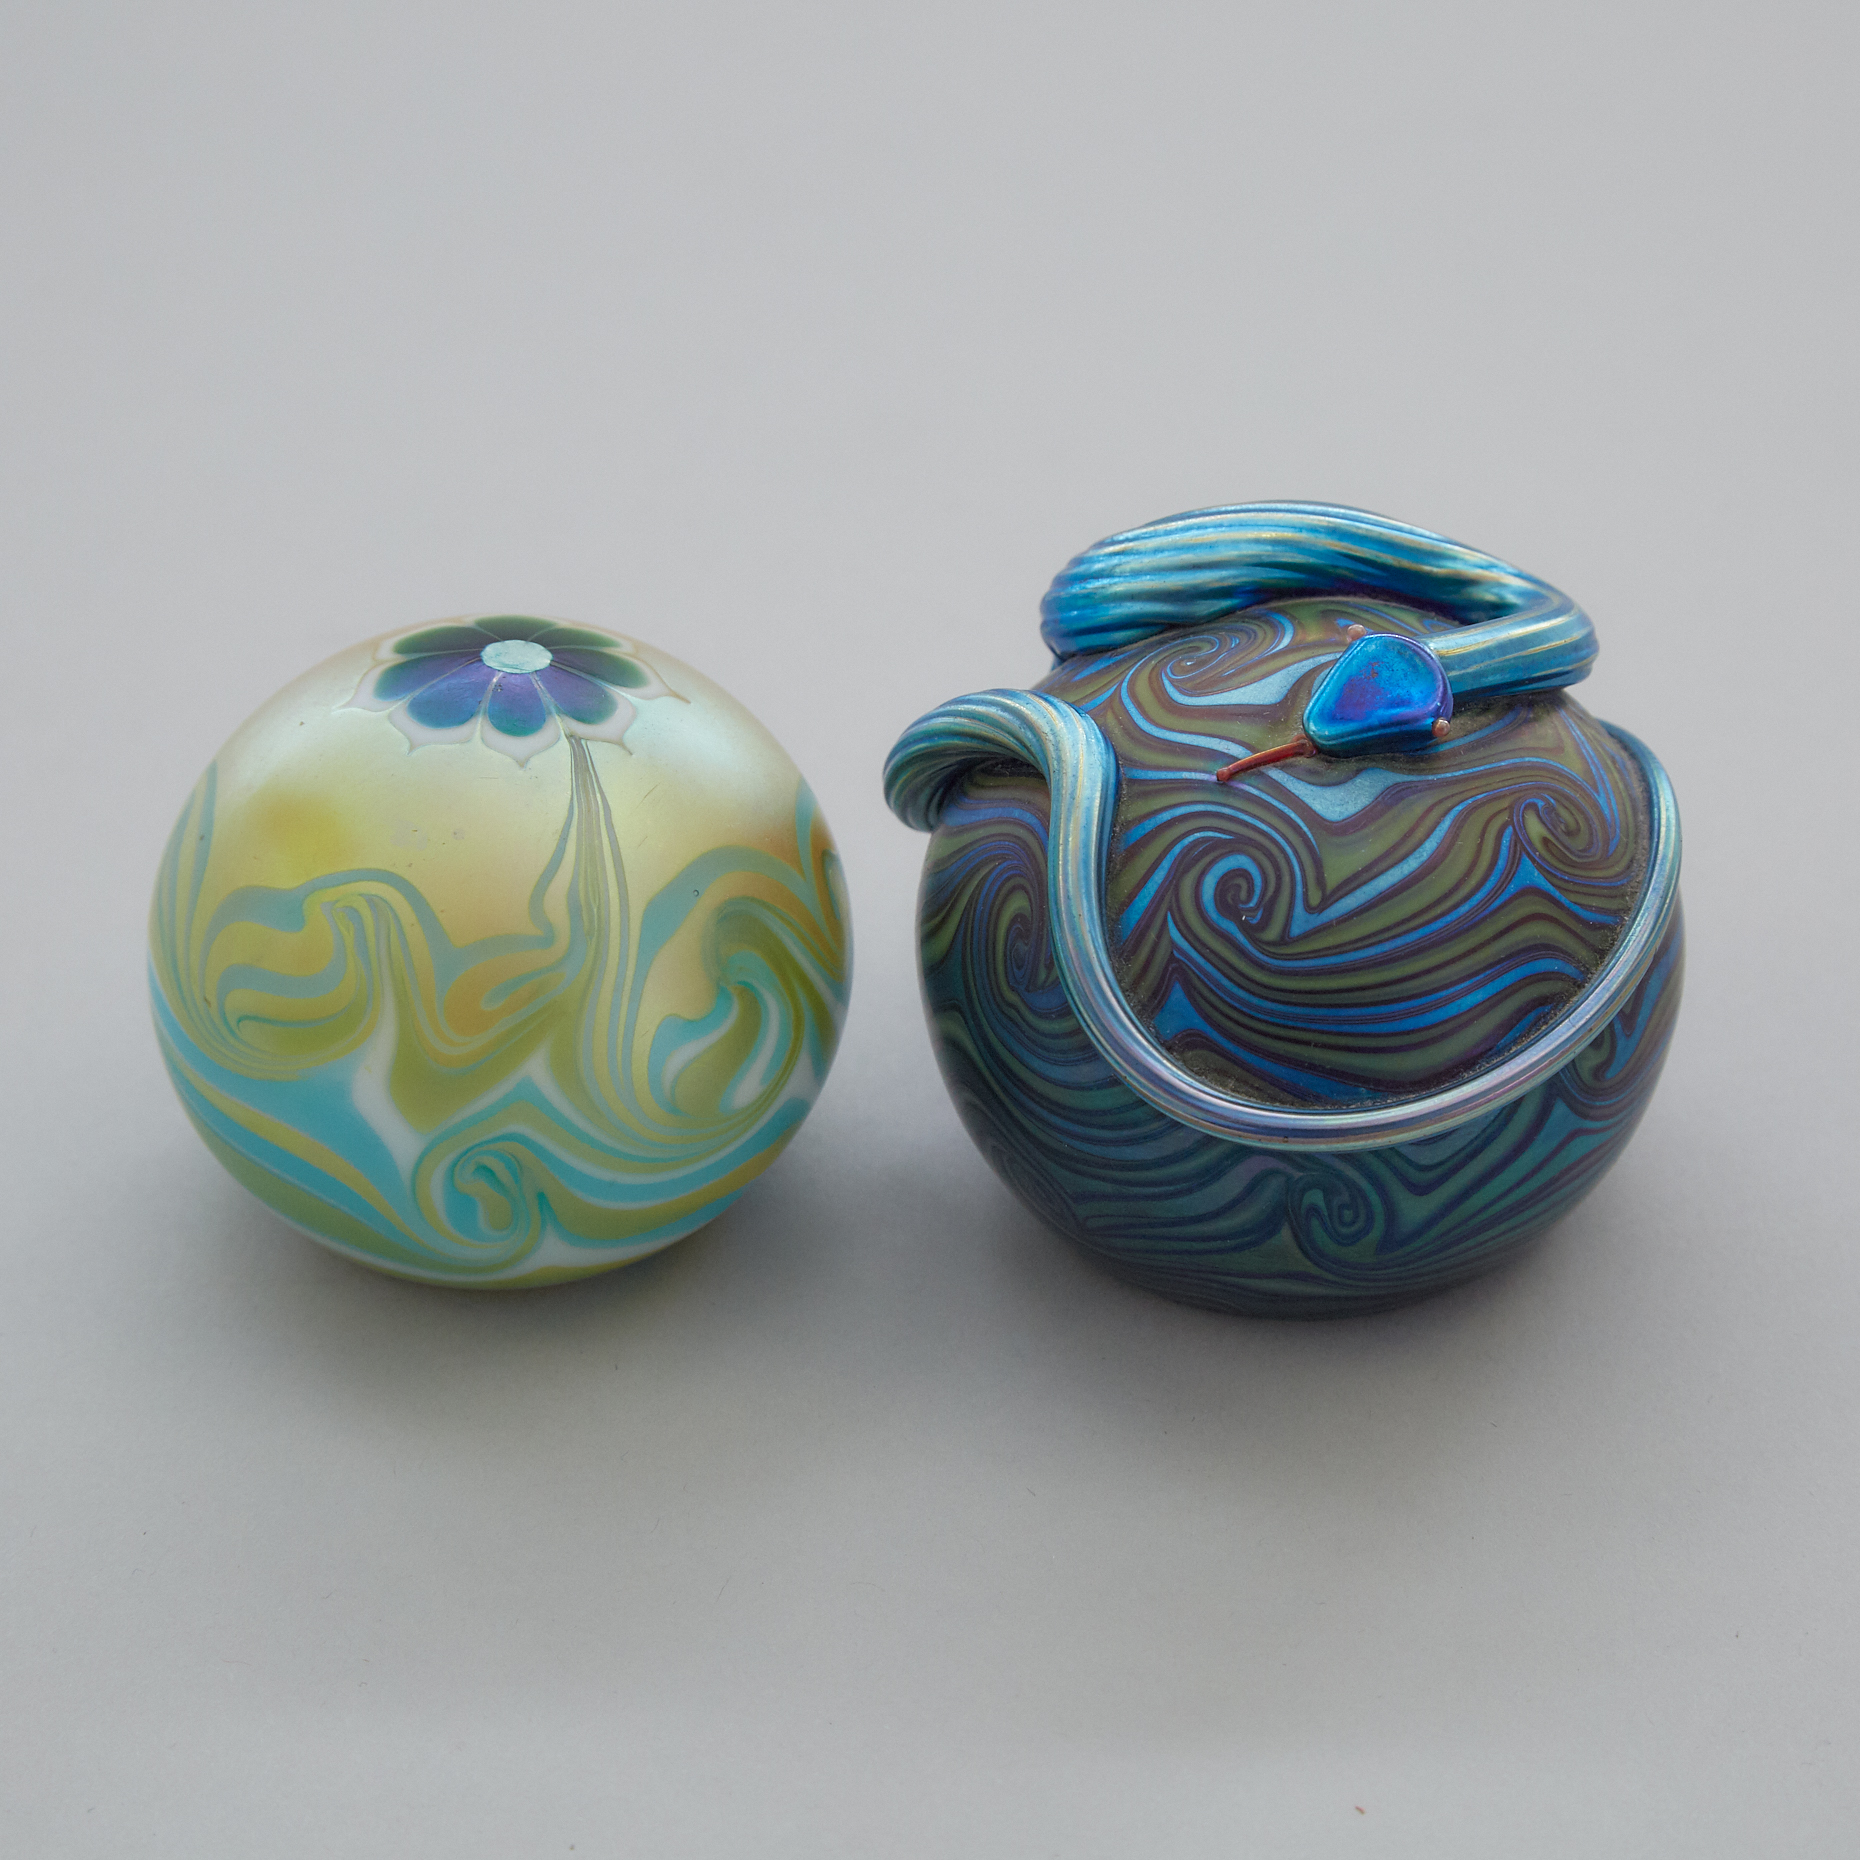 Two American Iridescent Glass Paperweights, Orient & Flume and Lundberg Studios, 1976/77